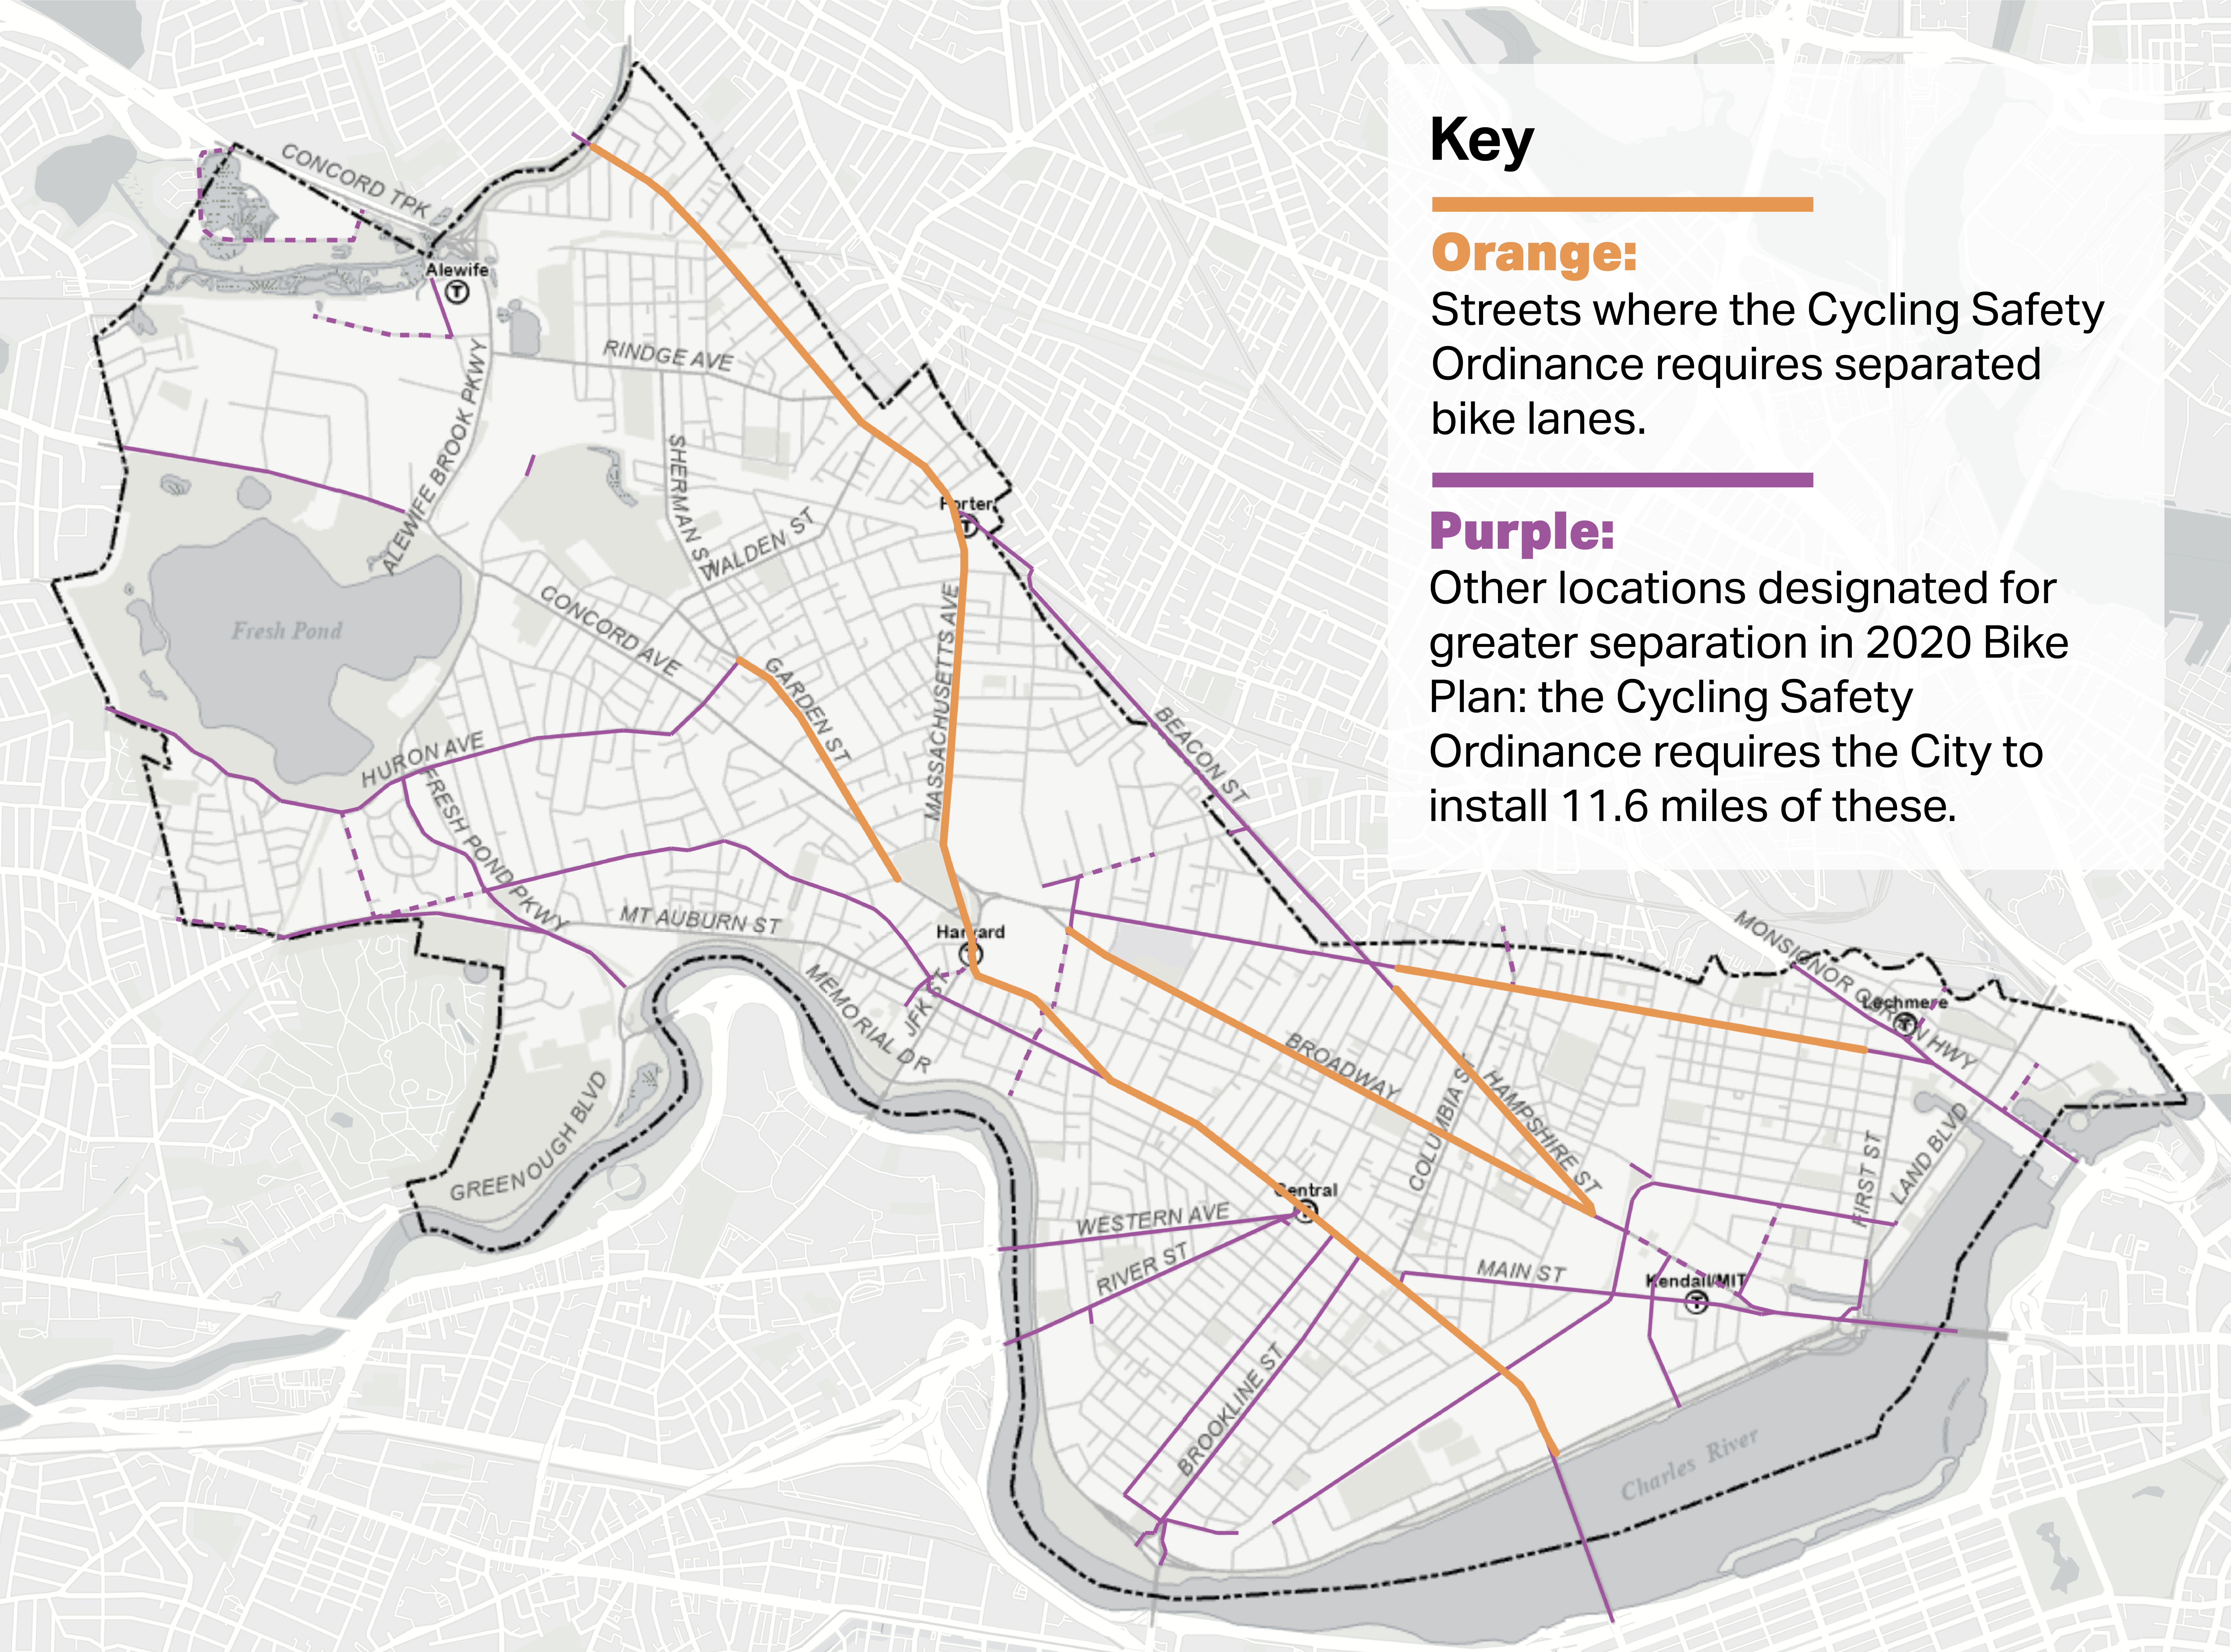 Map of Cambridge, showing streets where the Cycling Safety Ordinance requires separated bike lanes be installed in orange. Purple lines show other locations designated for greater separation in 2020 Bike Plan: the Cycling Safety Ordinance requires the City to install 11.6 miles of these.